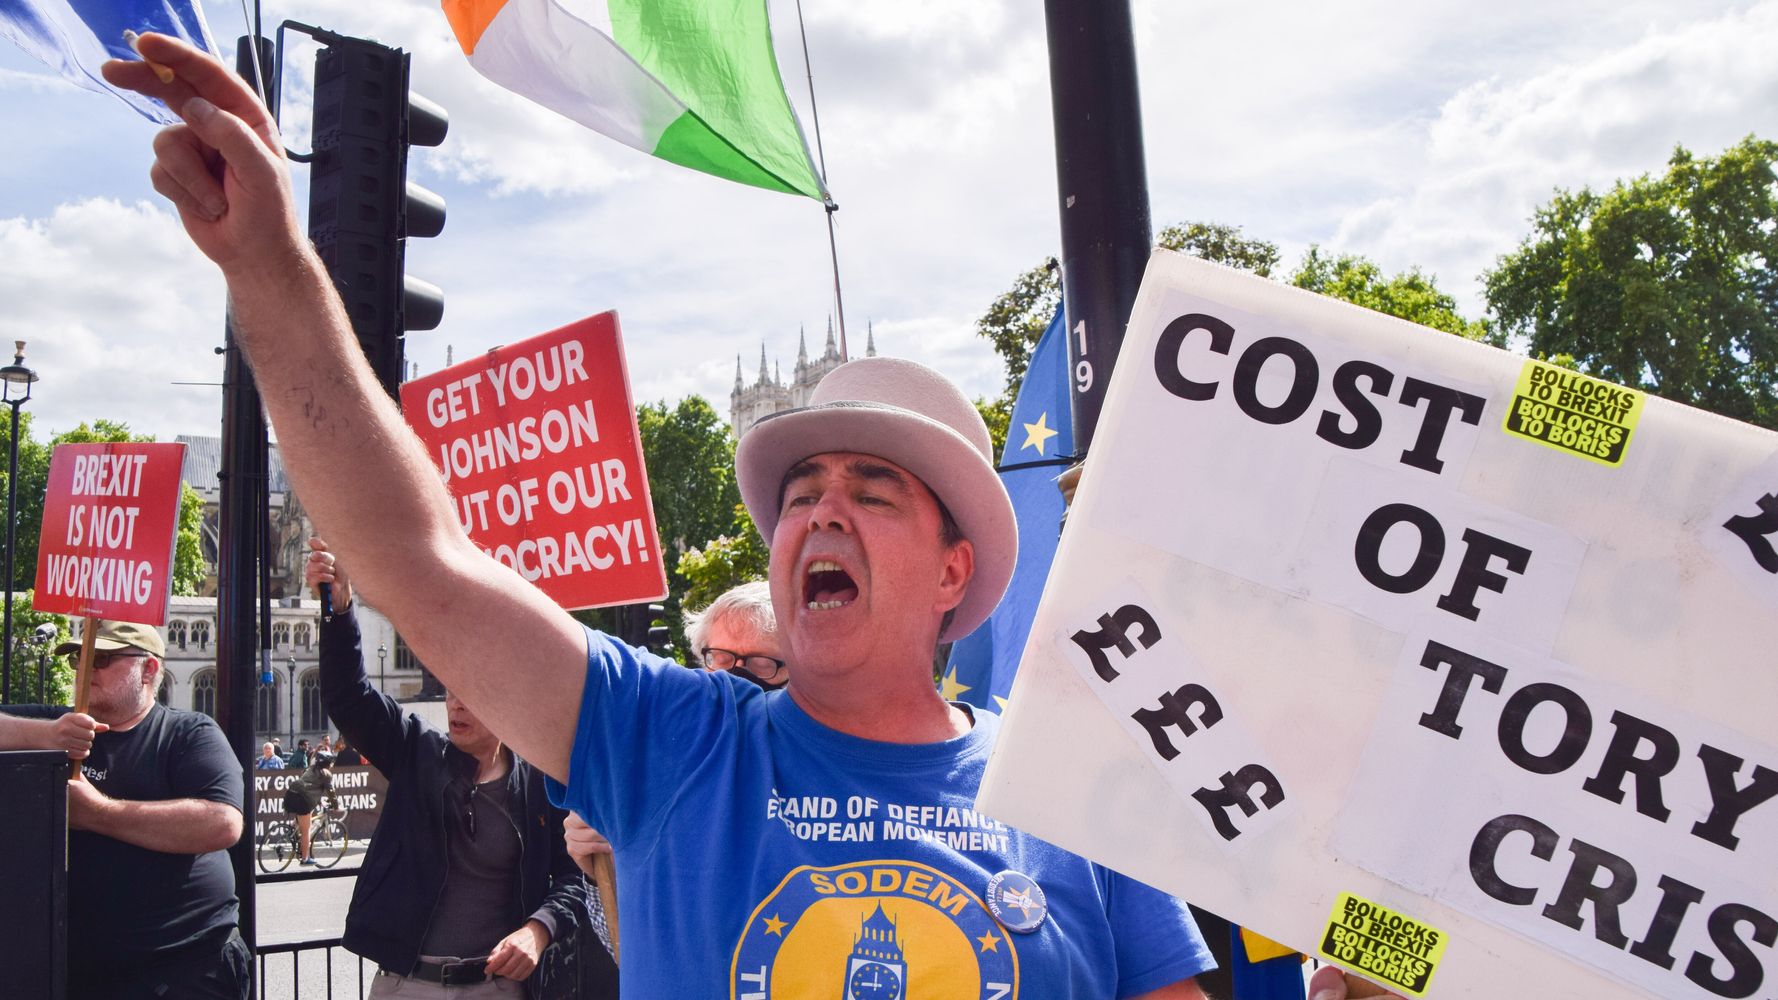 The Stop Brexit Man Could Be Prosecuted For Protesting – Here's Why That Matters